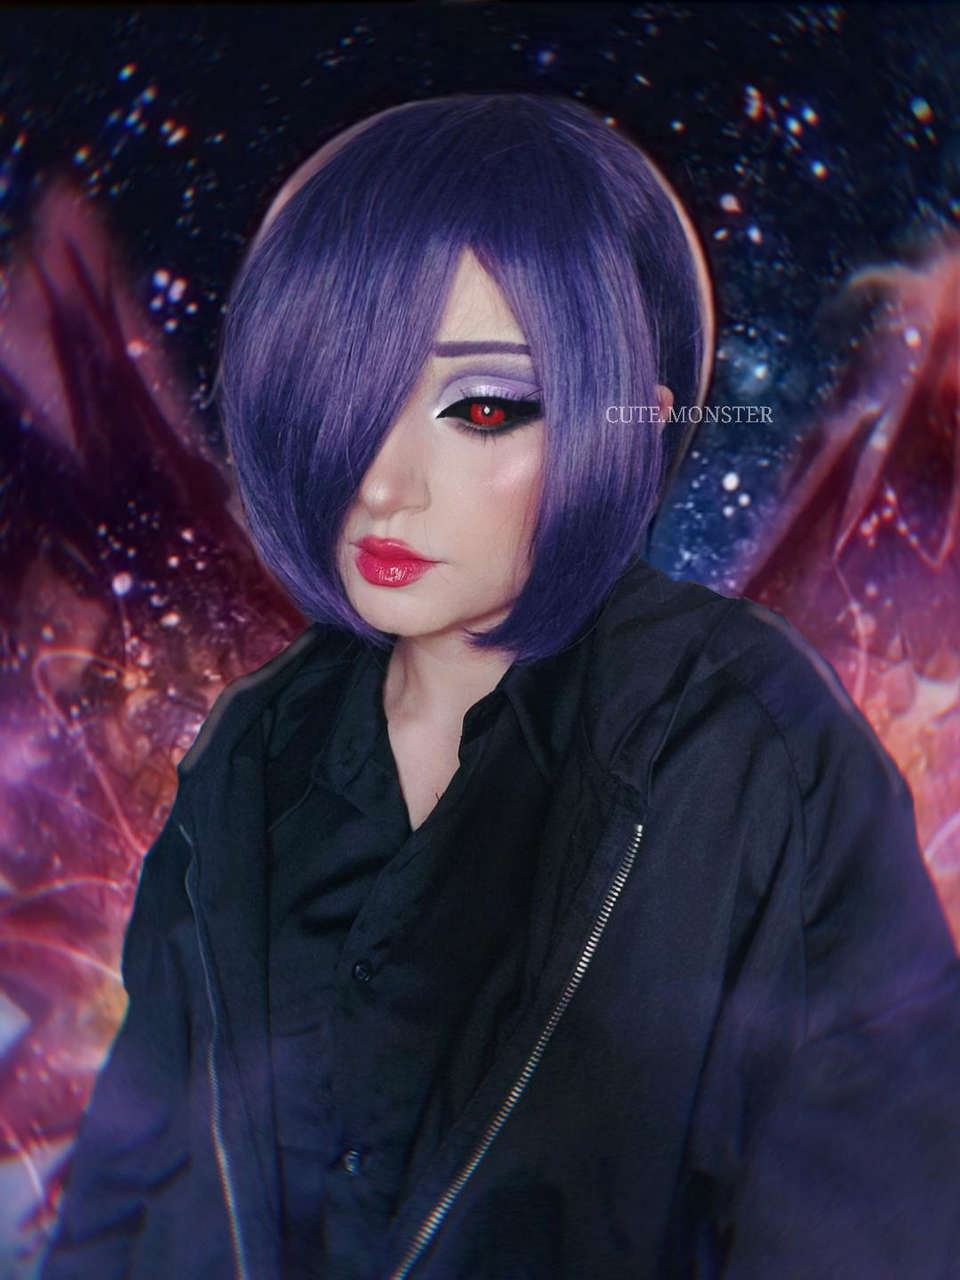 Touka Cosplay By Cute Monster On Instagra